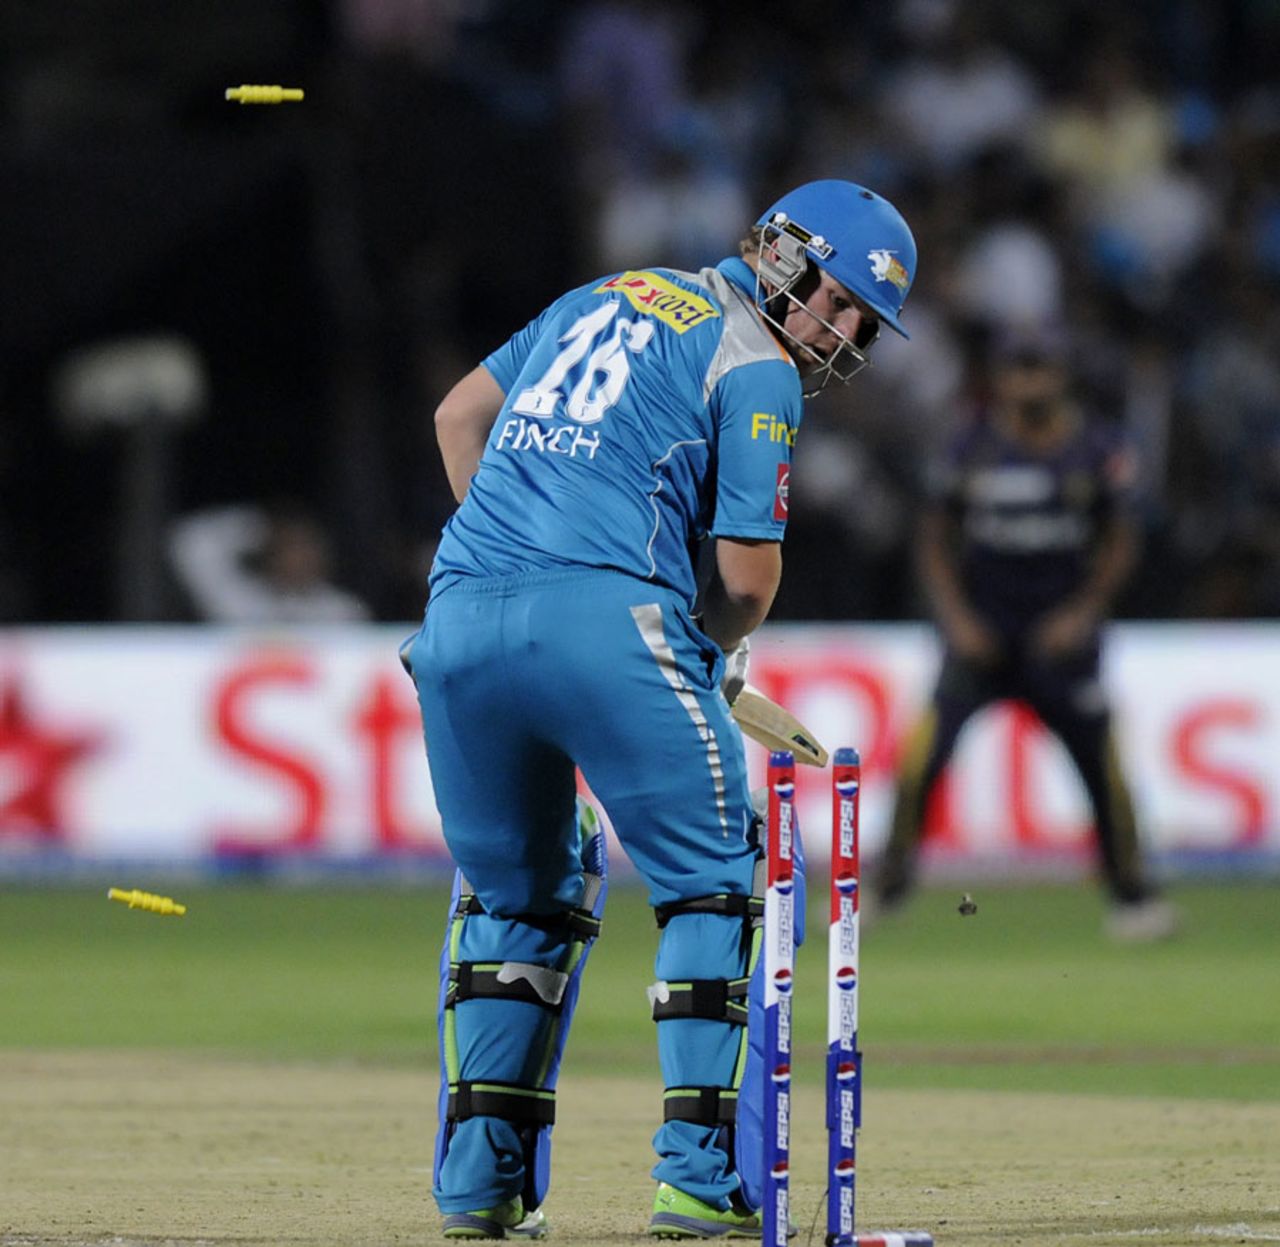 Aaron Finch finds his stumps broken by a Jacques Kallis delivery, Pune Warriors v Kolkata Knight Riders, IPL 2013, Pune, May 9, 2013